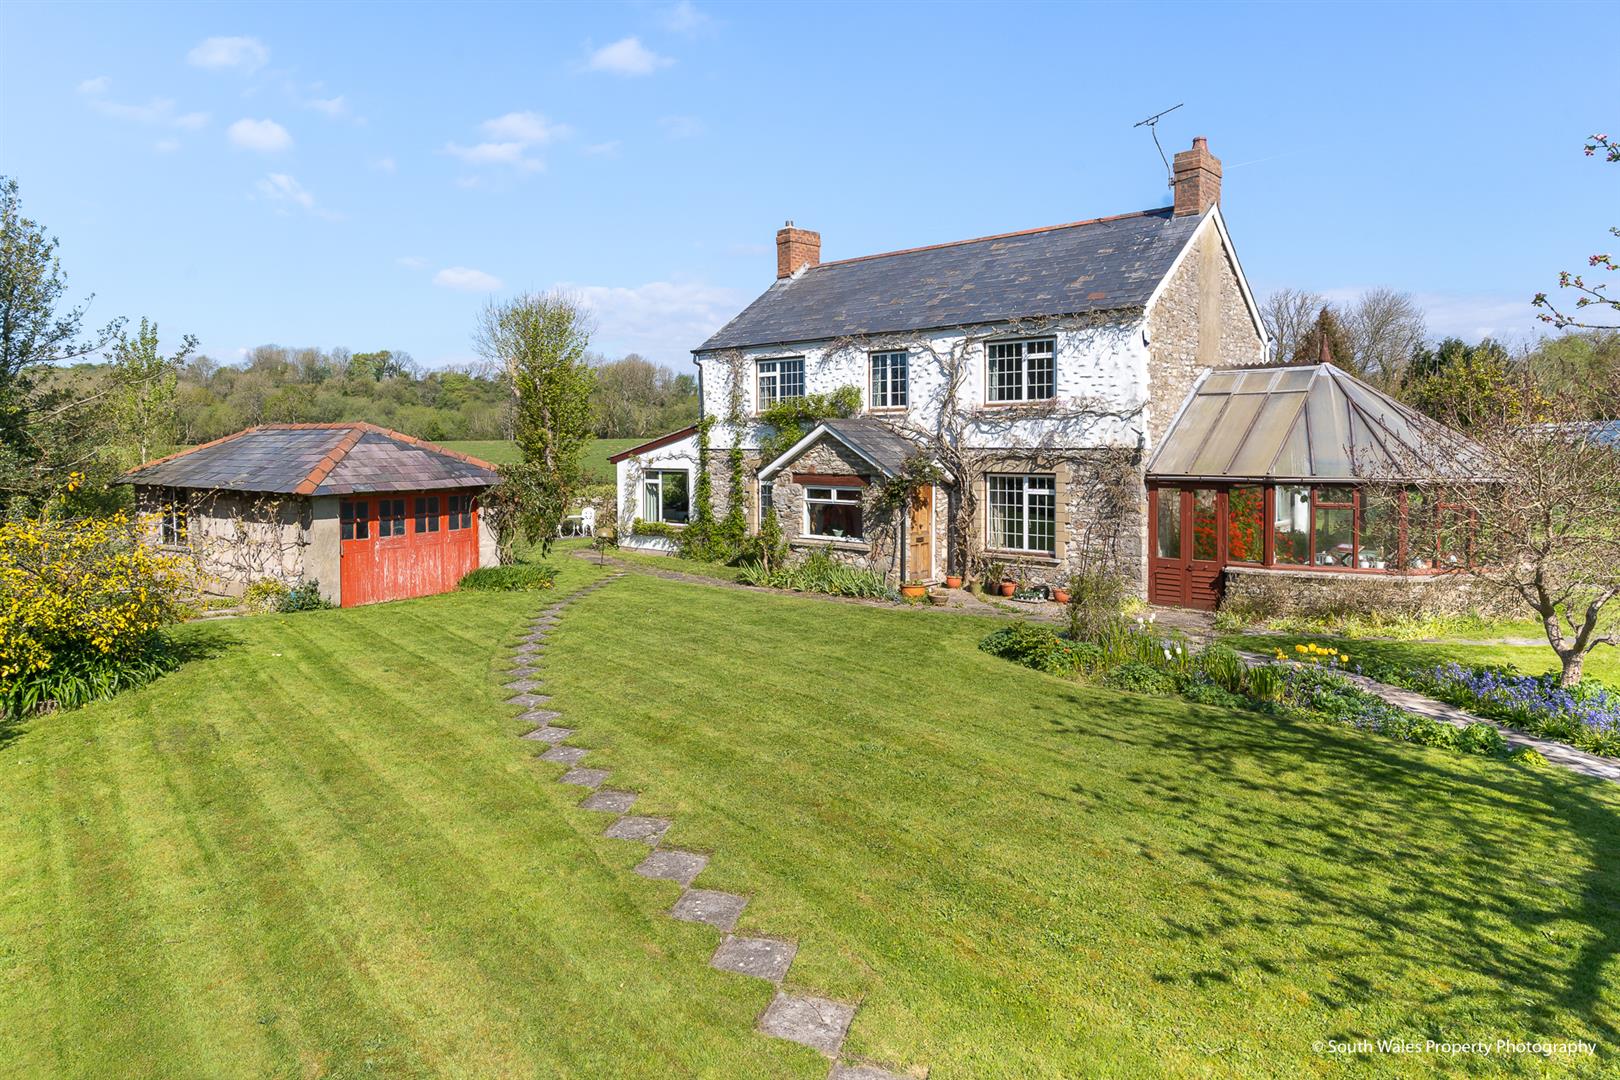 A pretty stone-built former farmhouse in Trerhyngyll thought to date from early Victorian times. (Image credit: South Wales Property Photography)